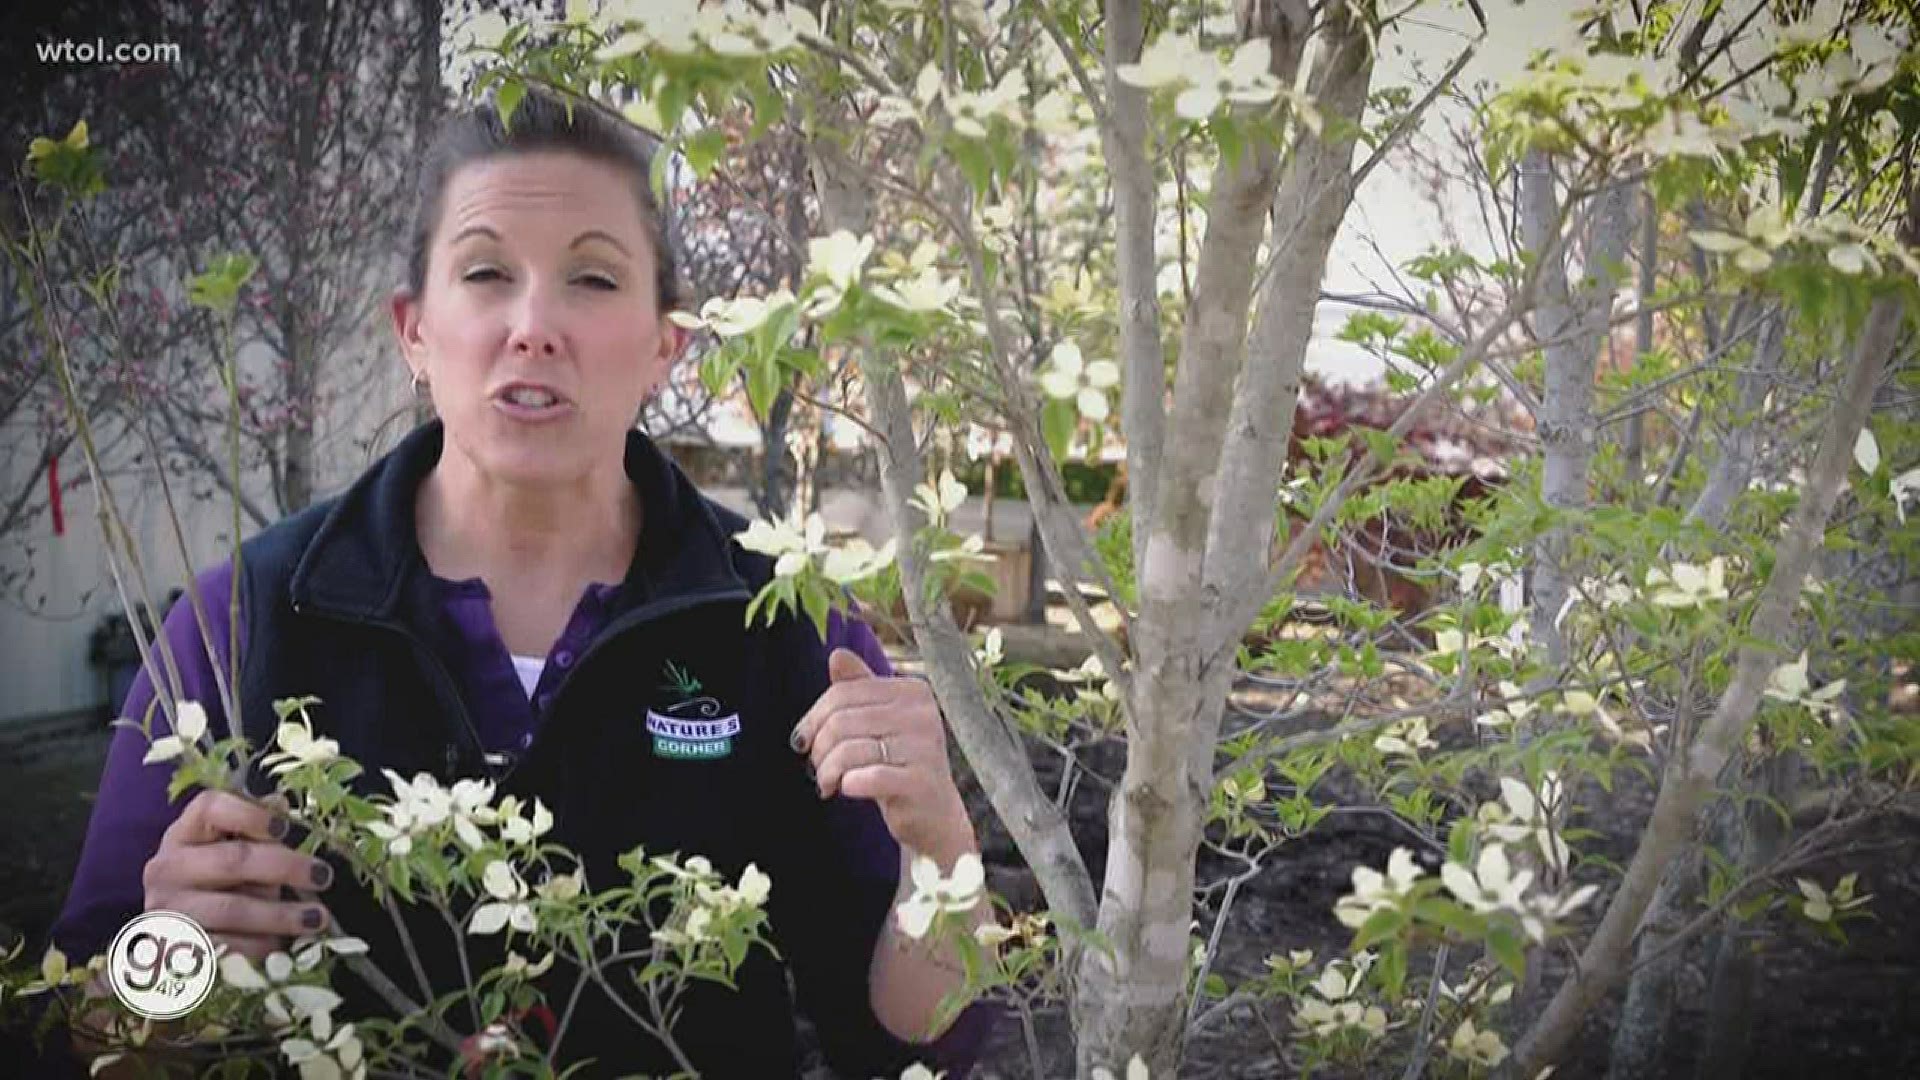 Jennifer with Nature's corner goes over the steps to spruce up your garden.